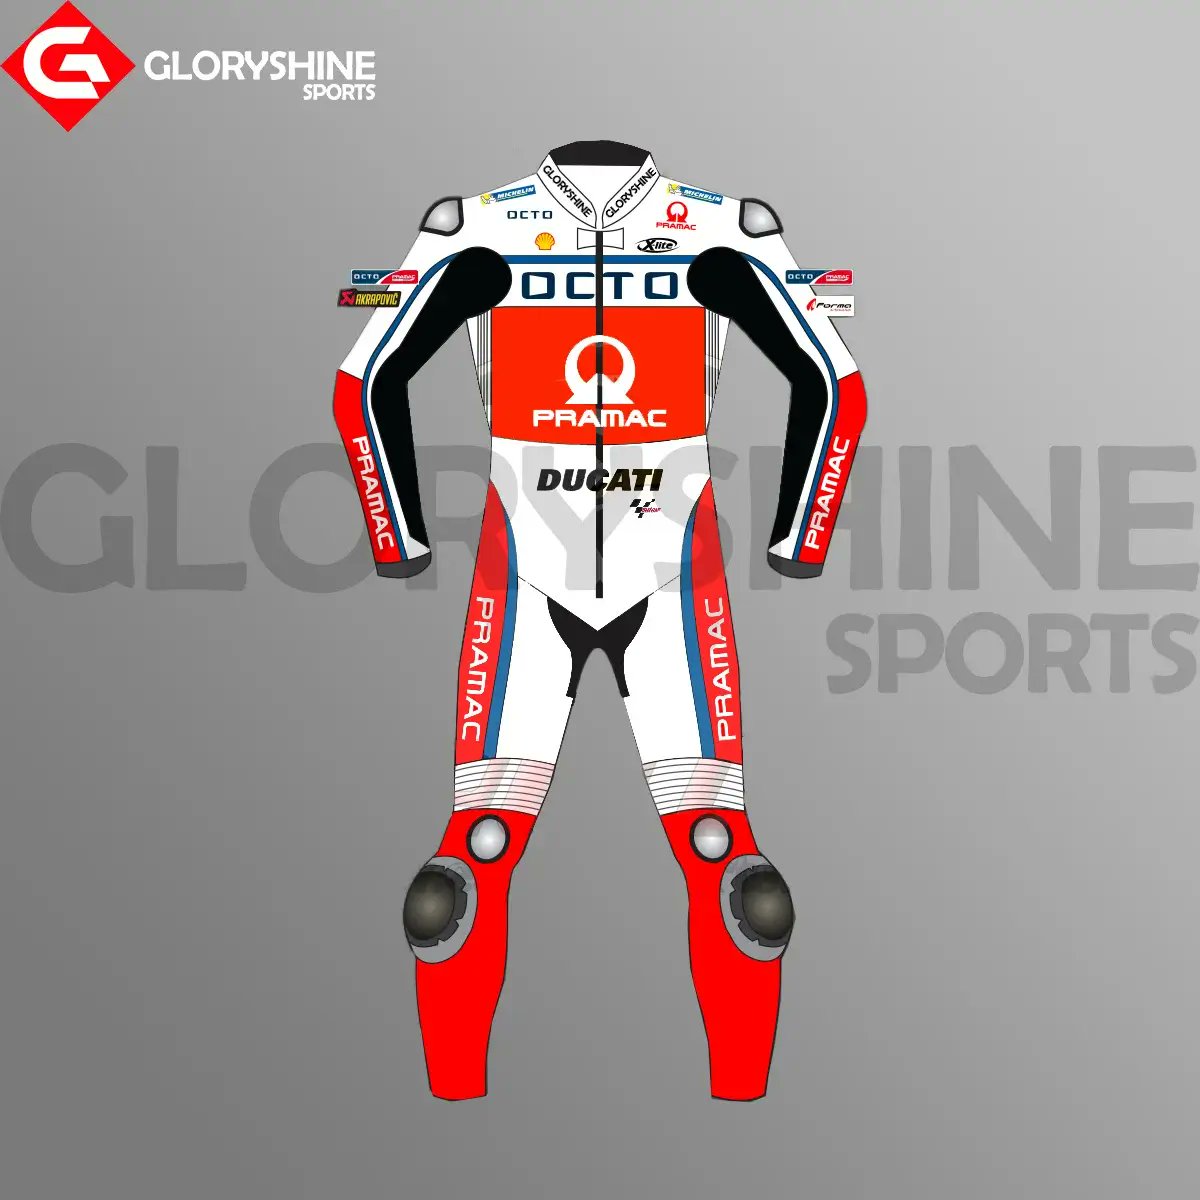 Buy Danilo Petrucci Race Suit from MotoGP 2016 with a flat 38% off. This Danilo Petrucci Race Suit Replica is Custom-Made with High-Quality Leather.
#DaniloPetrucci #Race #MotoGP
Buy now: gloryshinestore.com/product/danilo…